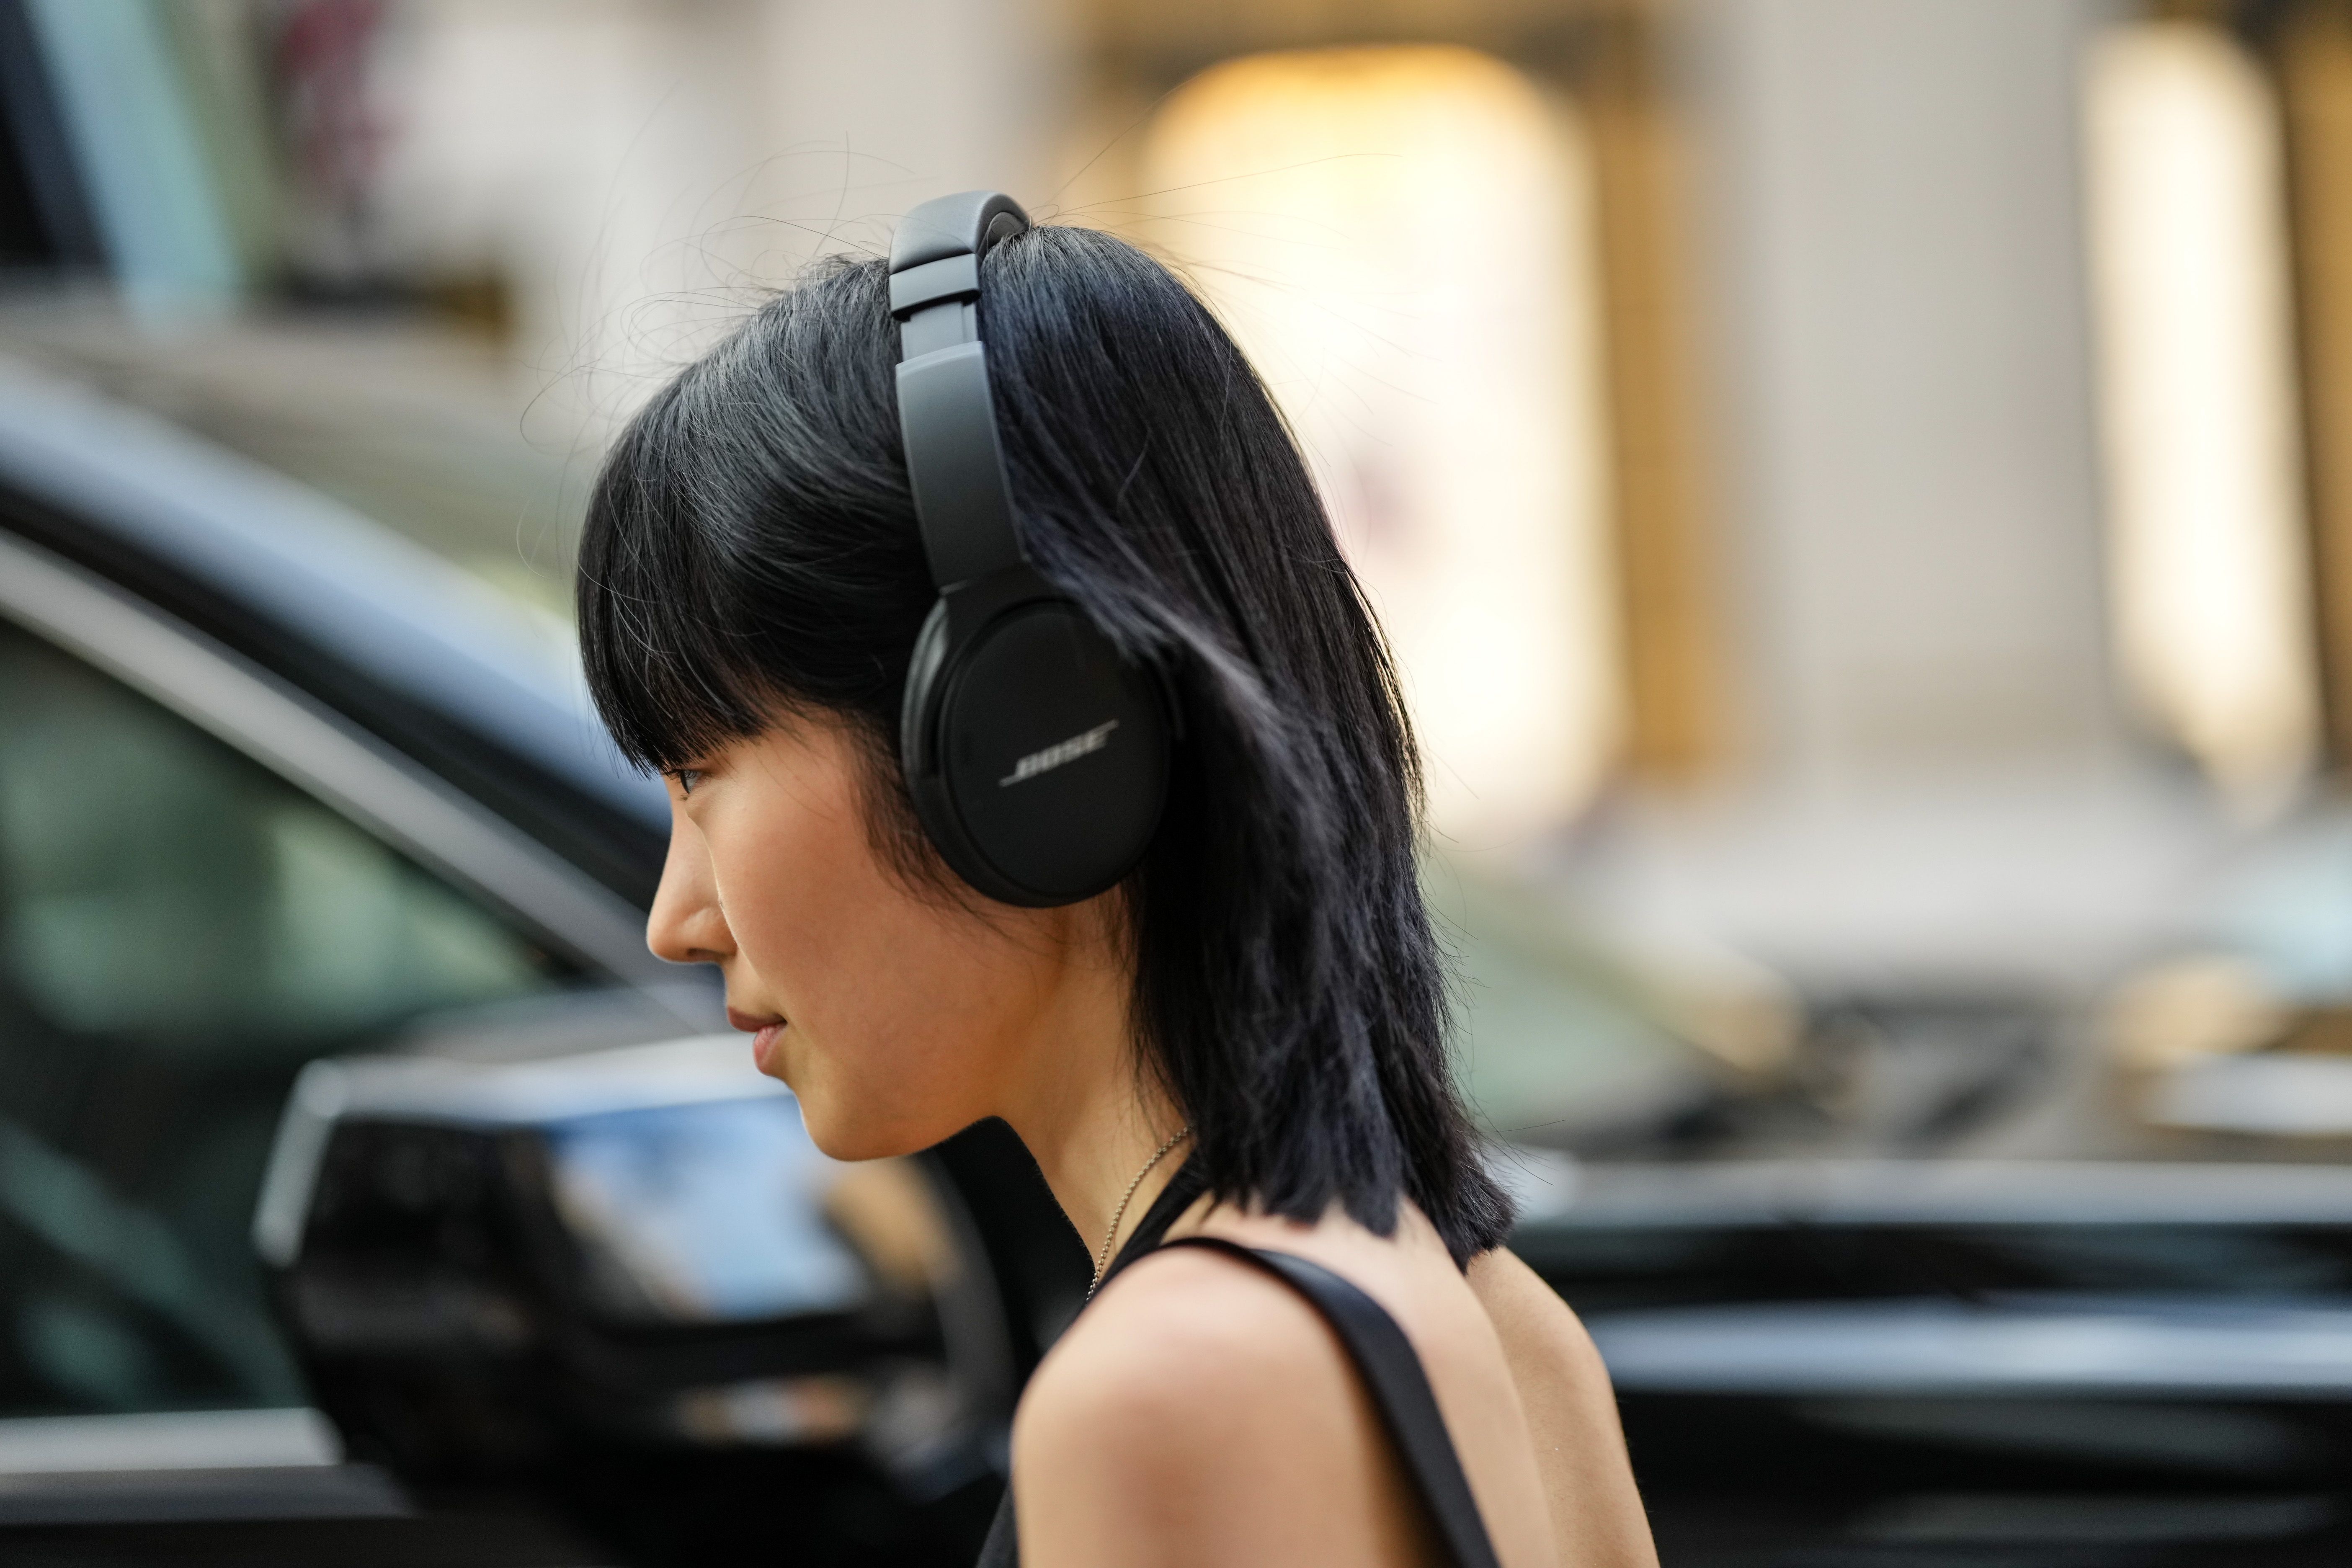 How active noise-cancelling headphones work: the technology behind